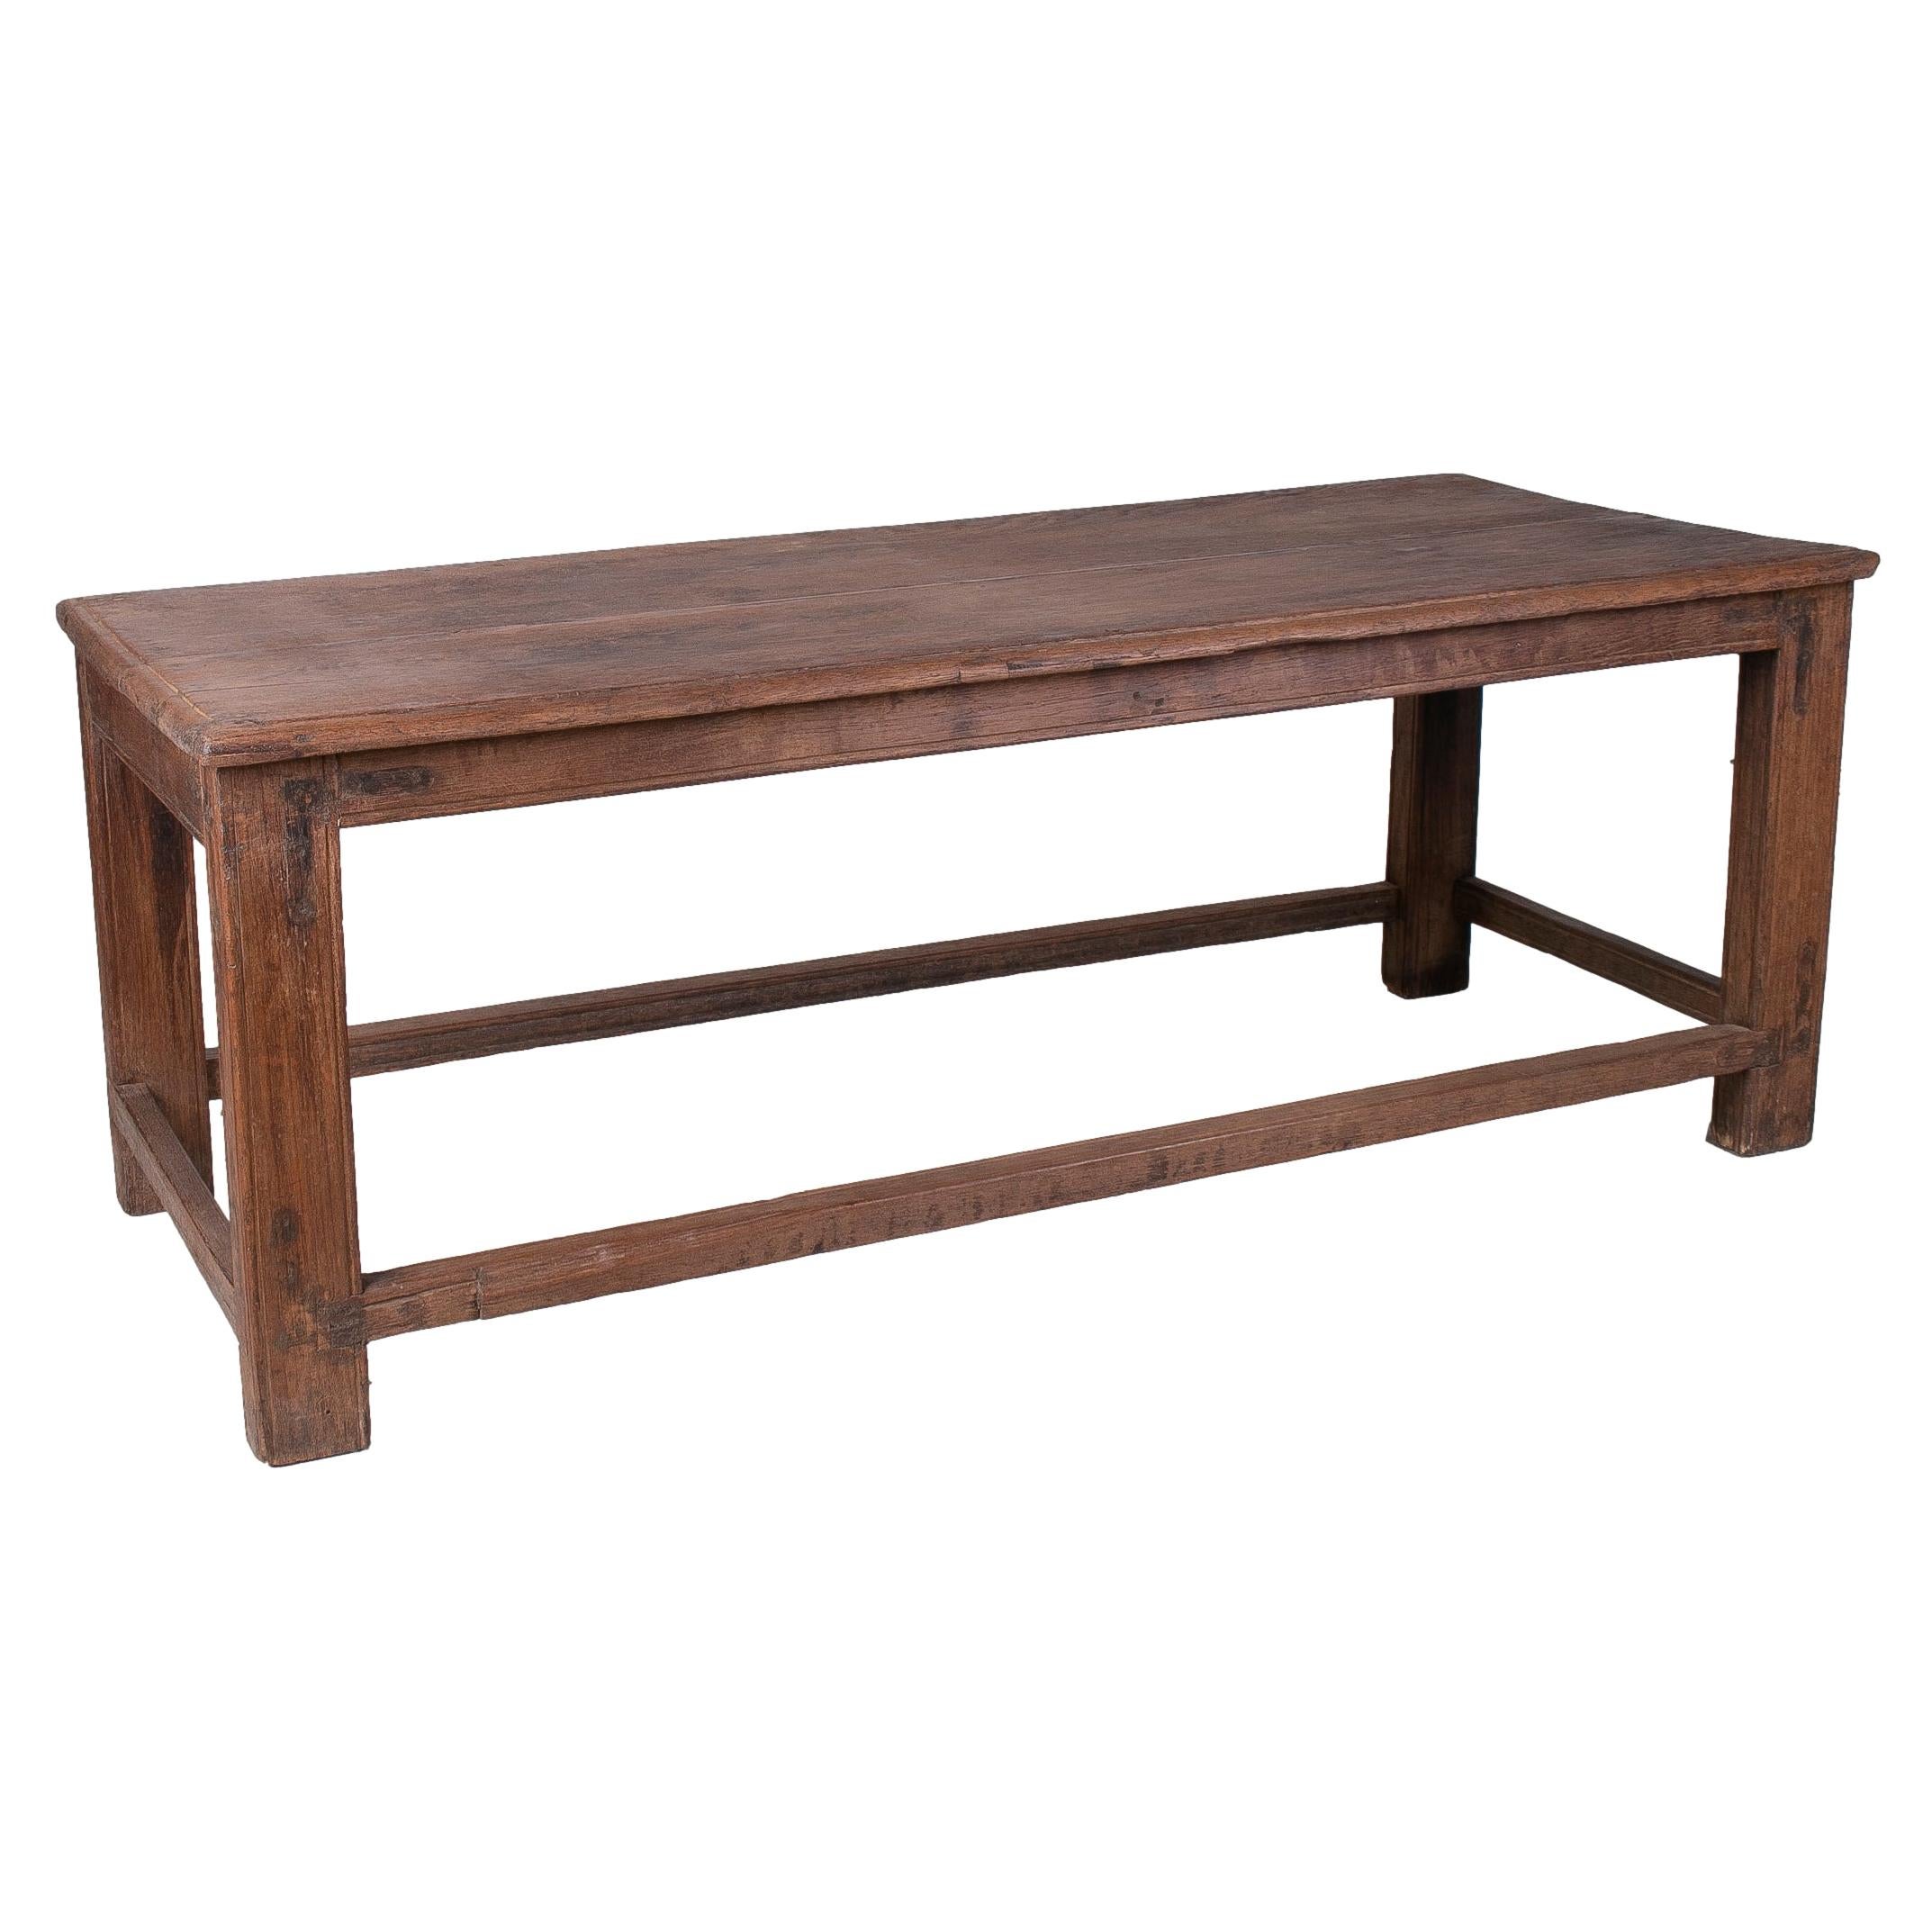 1970s Spanish Industrial Washed Wood Table w/ Crossbeam Legs For Sale